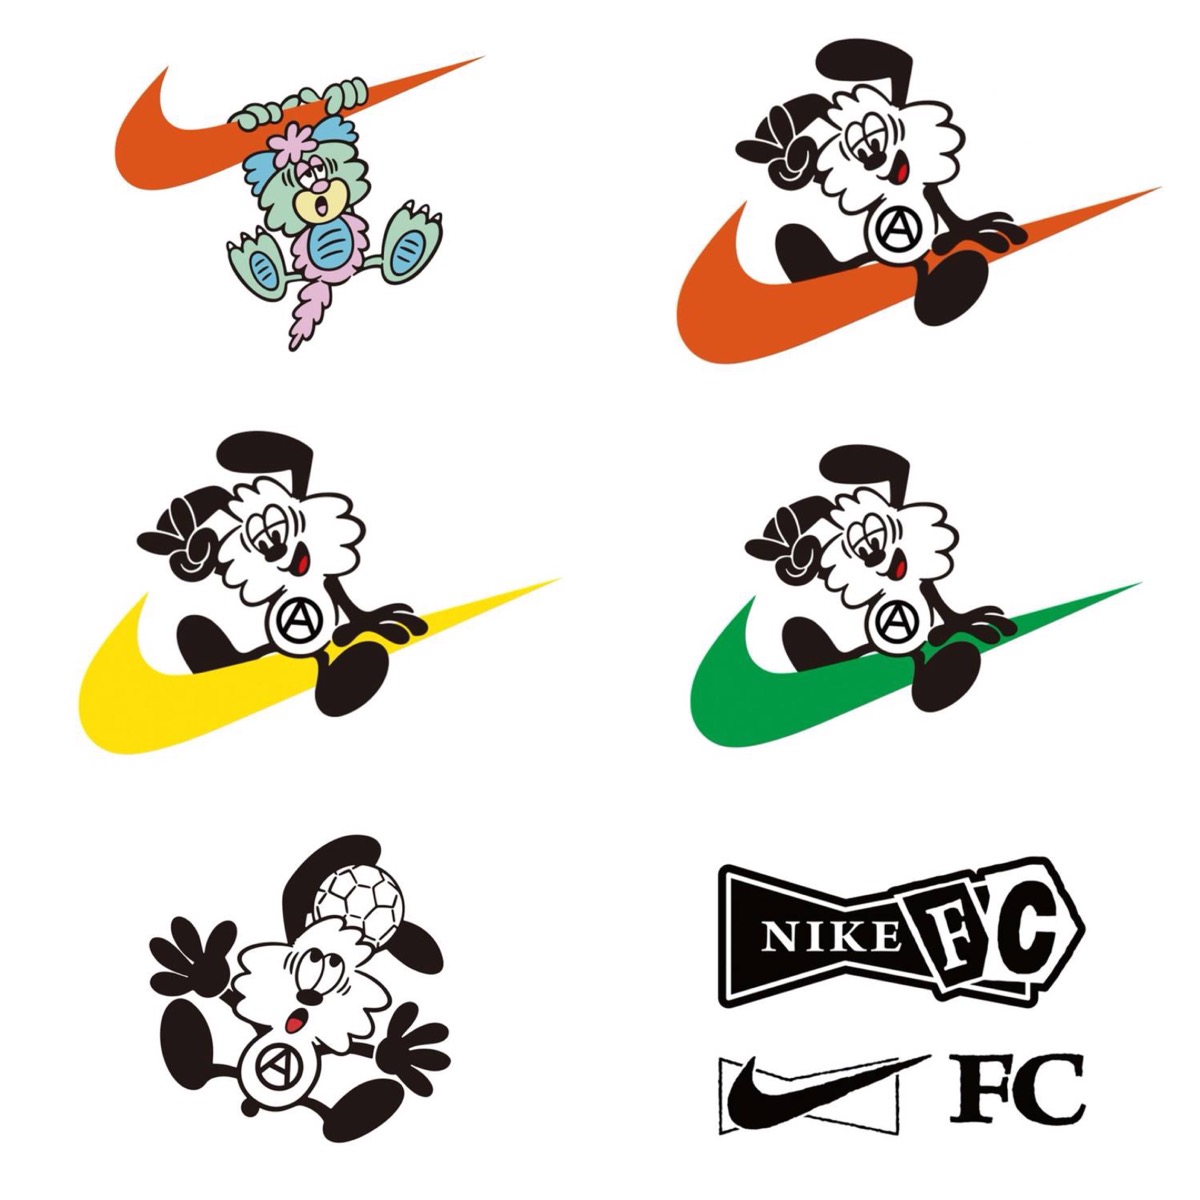 Nike By YouでVERDYのグラフィックを使ったウエアが作れる“NIKE FC